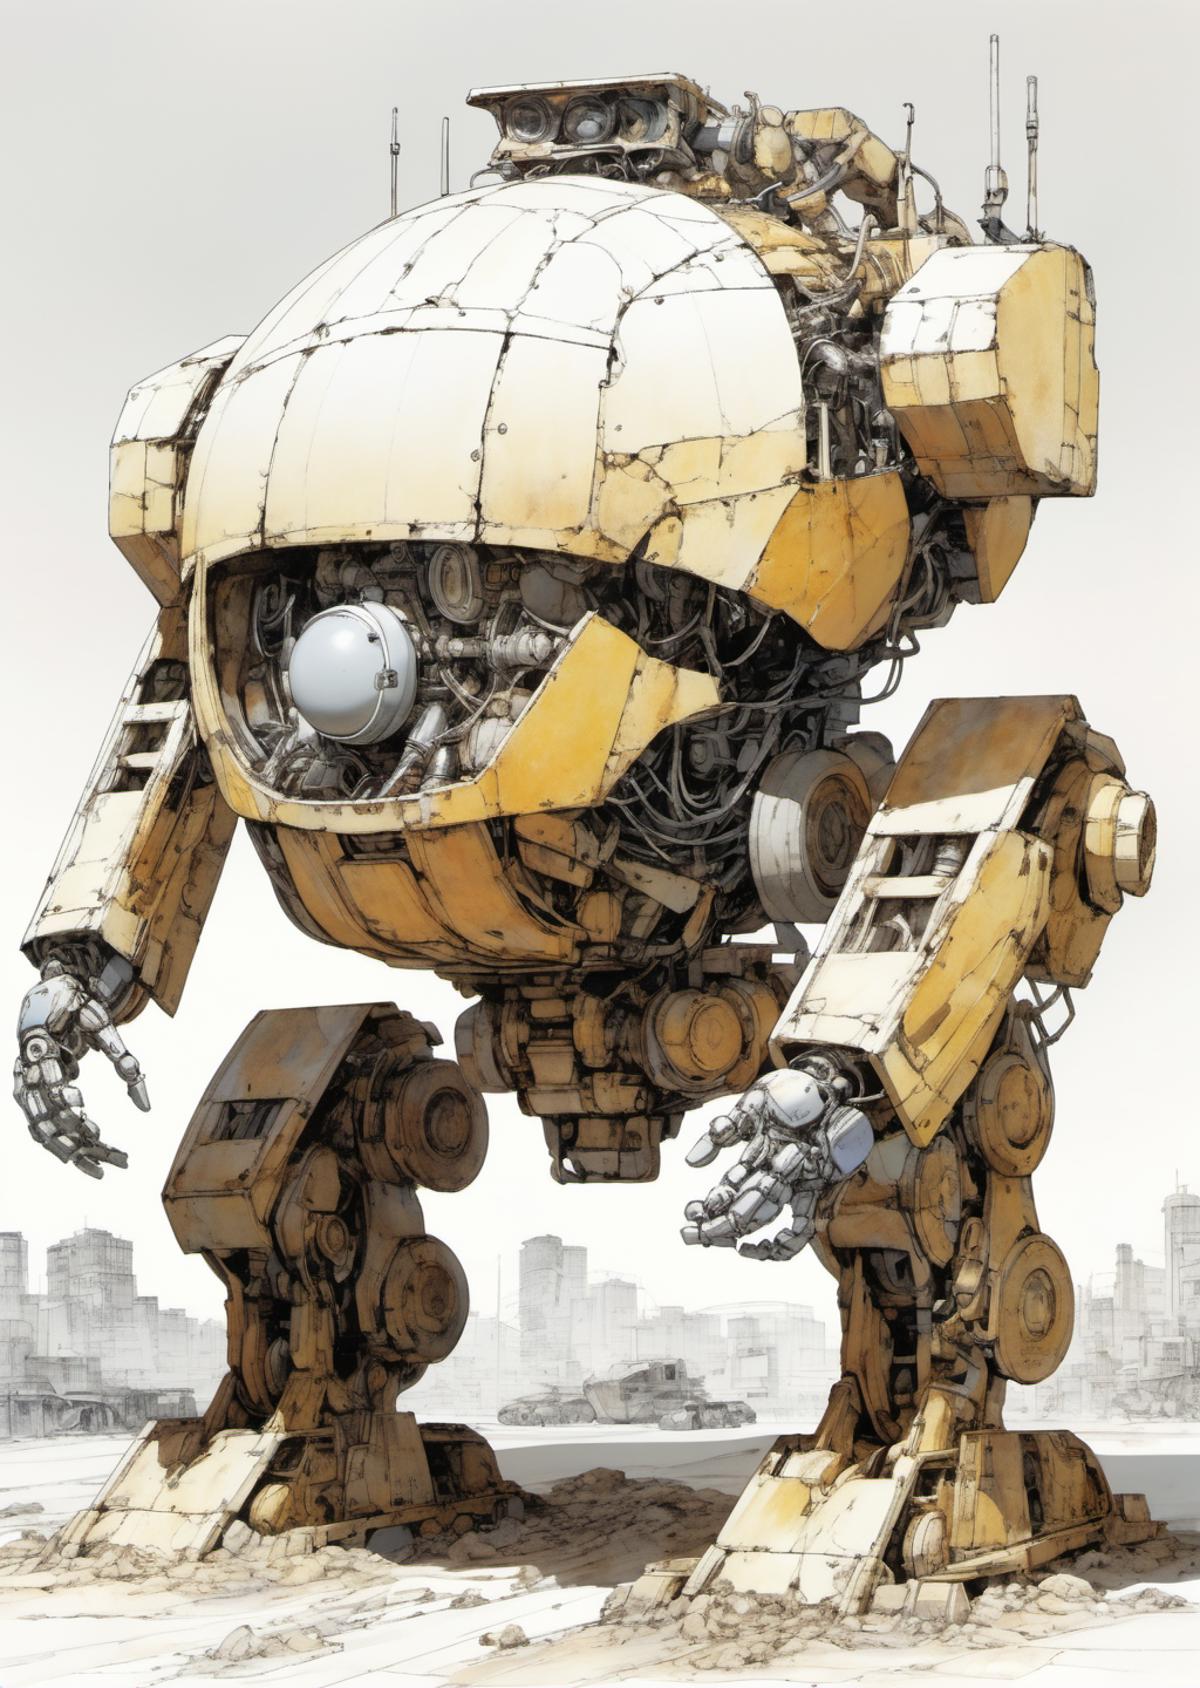 A large metal robot with many gears and cogs, possibly resembling a tank or a large mechanical object.